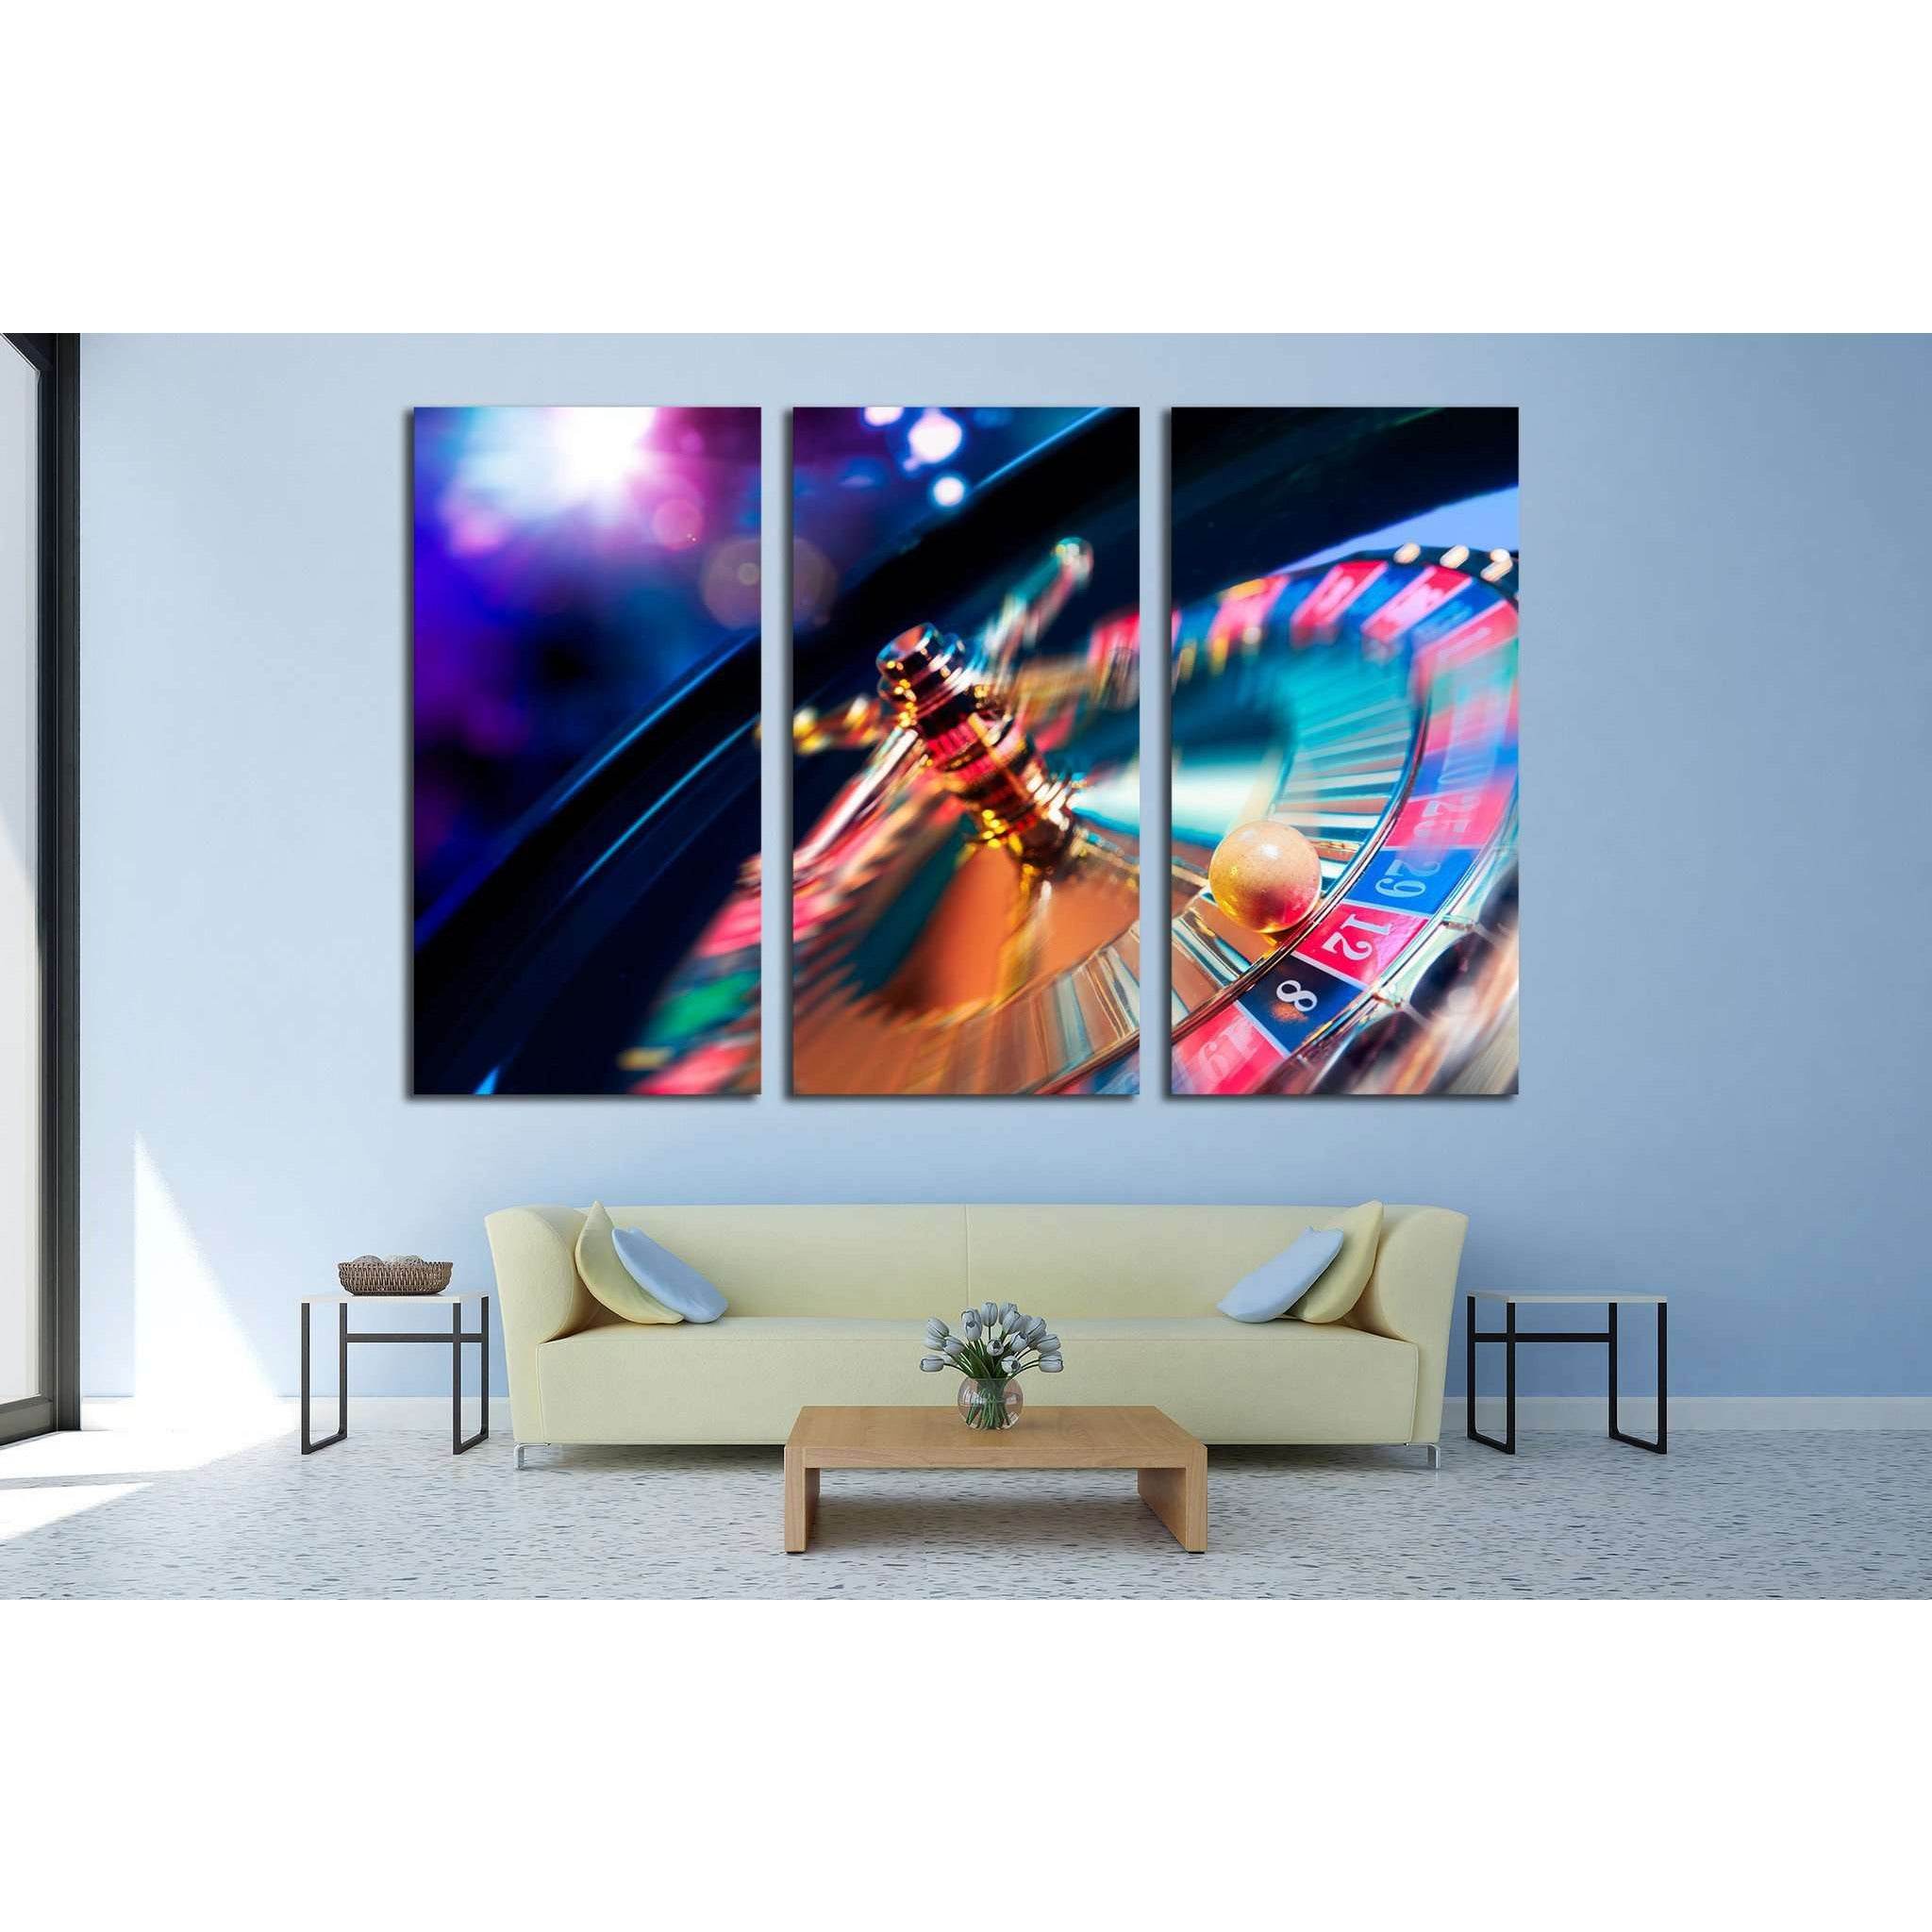 Casino Roulette №546 Ready to Hang Canvas Print